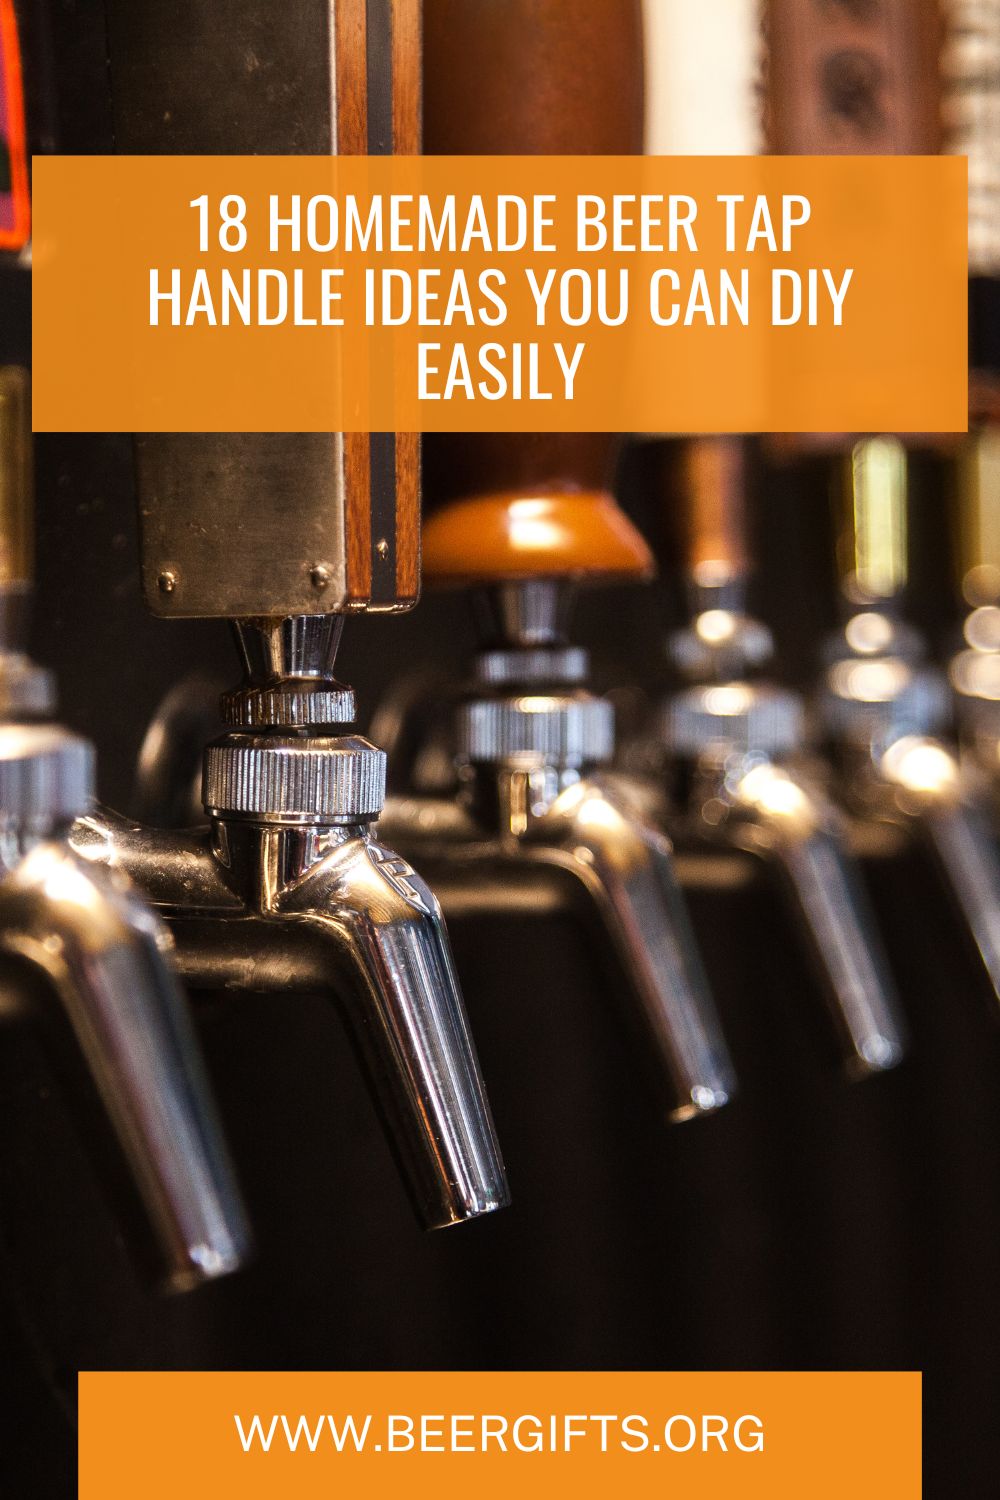 18 Homemade Beer Tap Handle ideas You Can DIY Easily1